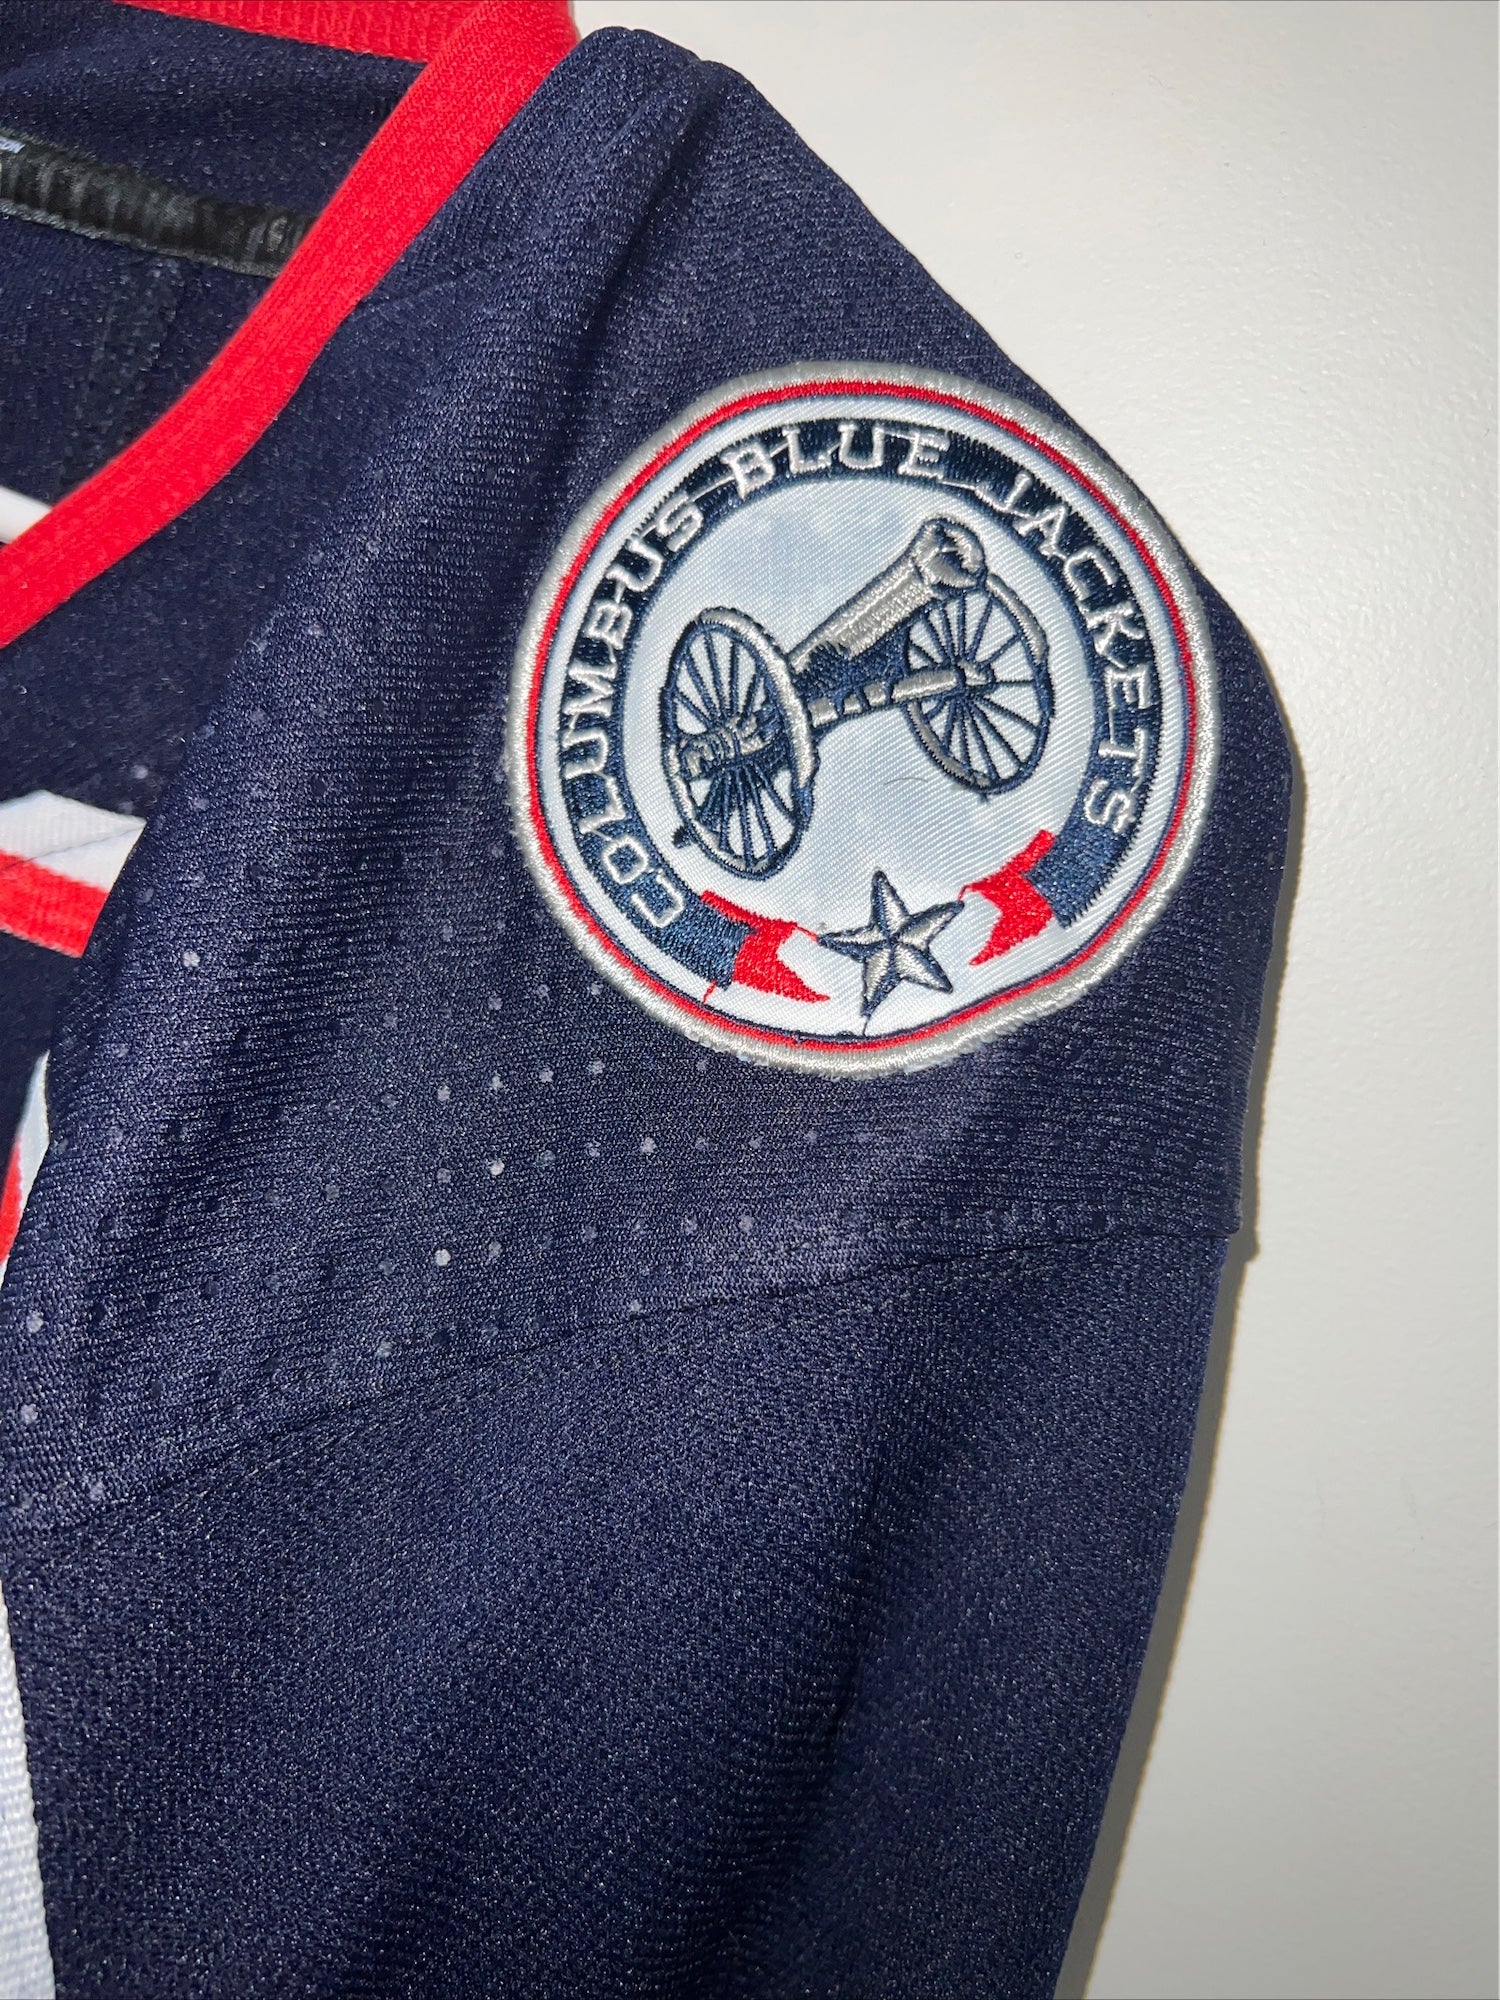 Adidas Columbus Blue Jackets Authentic Climalite NHL Jersey - Home - Adult